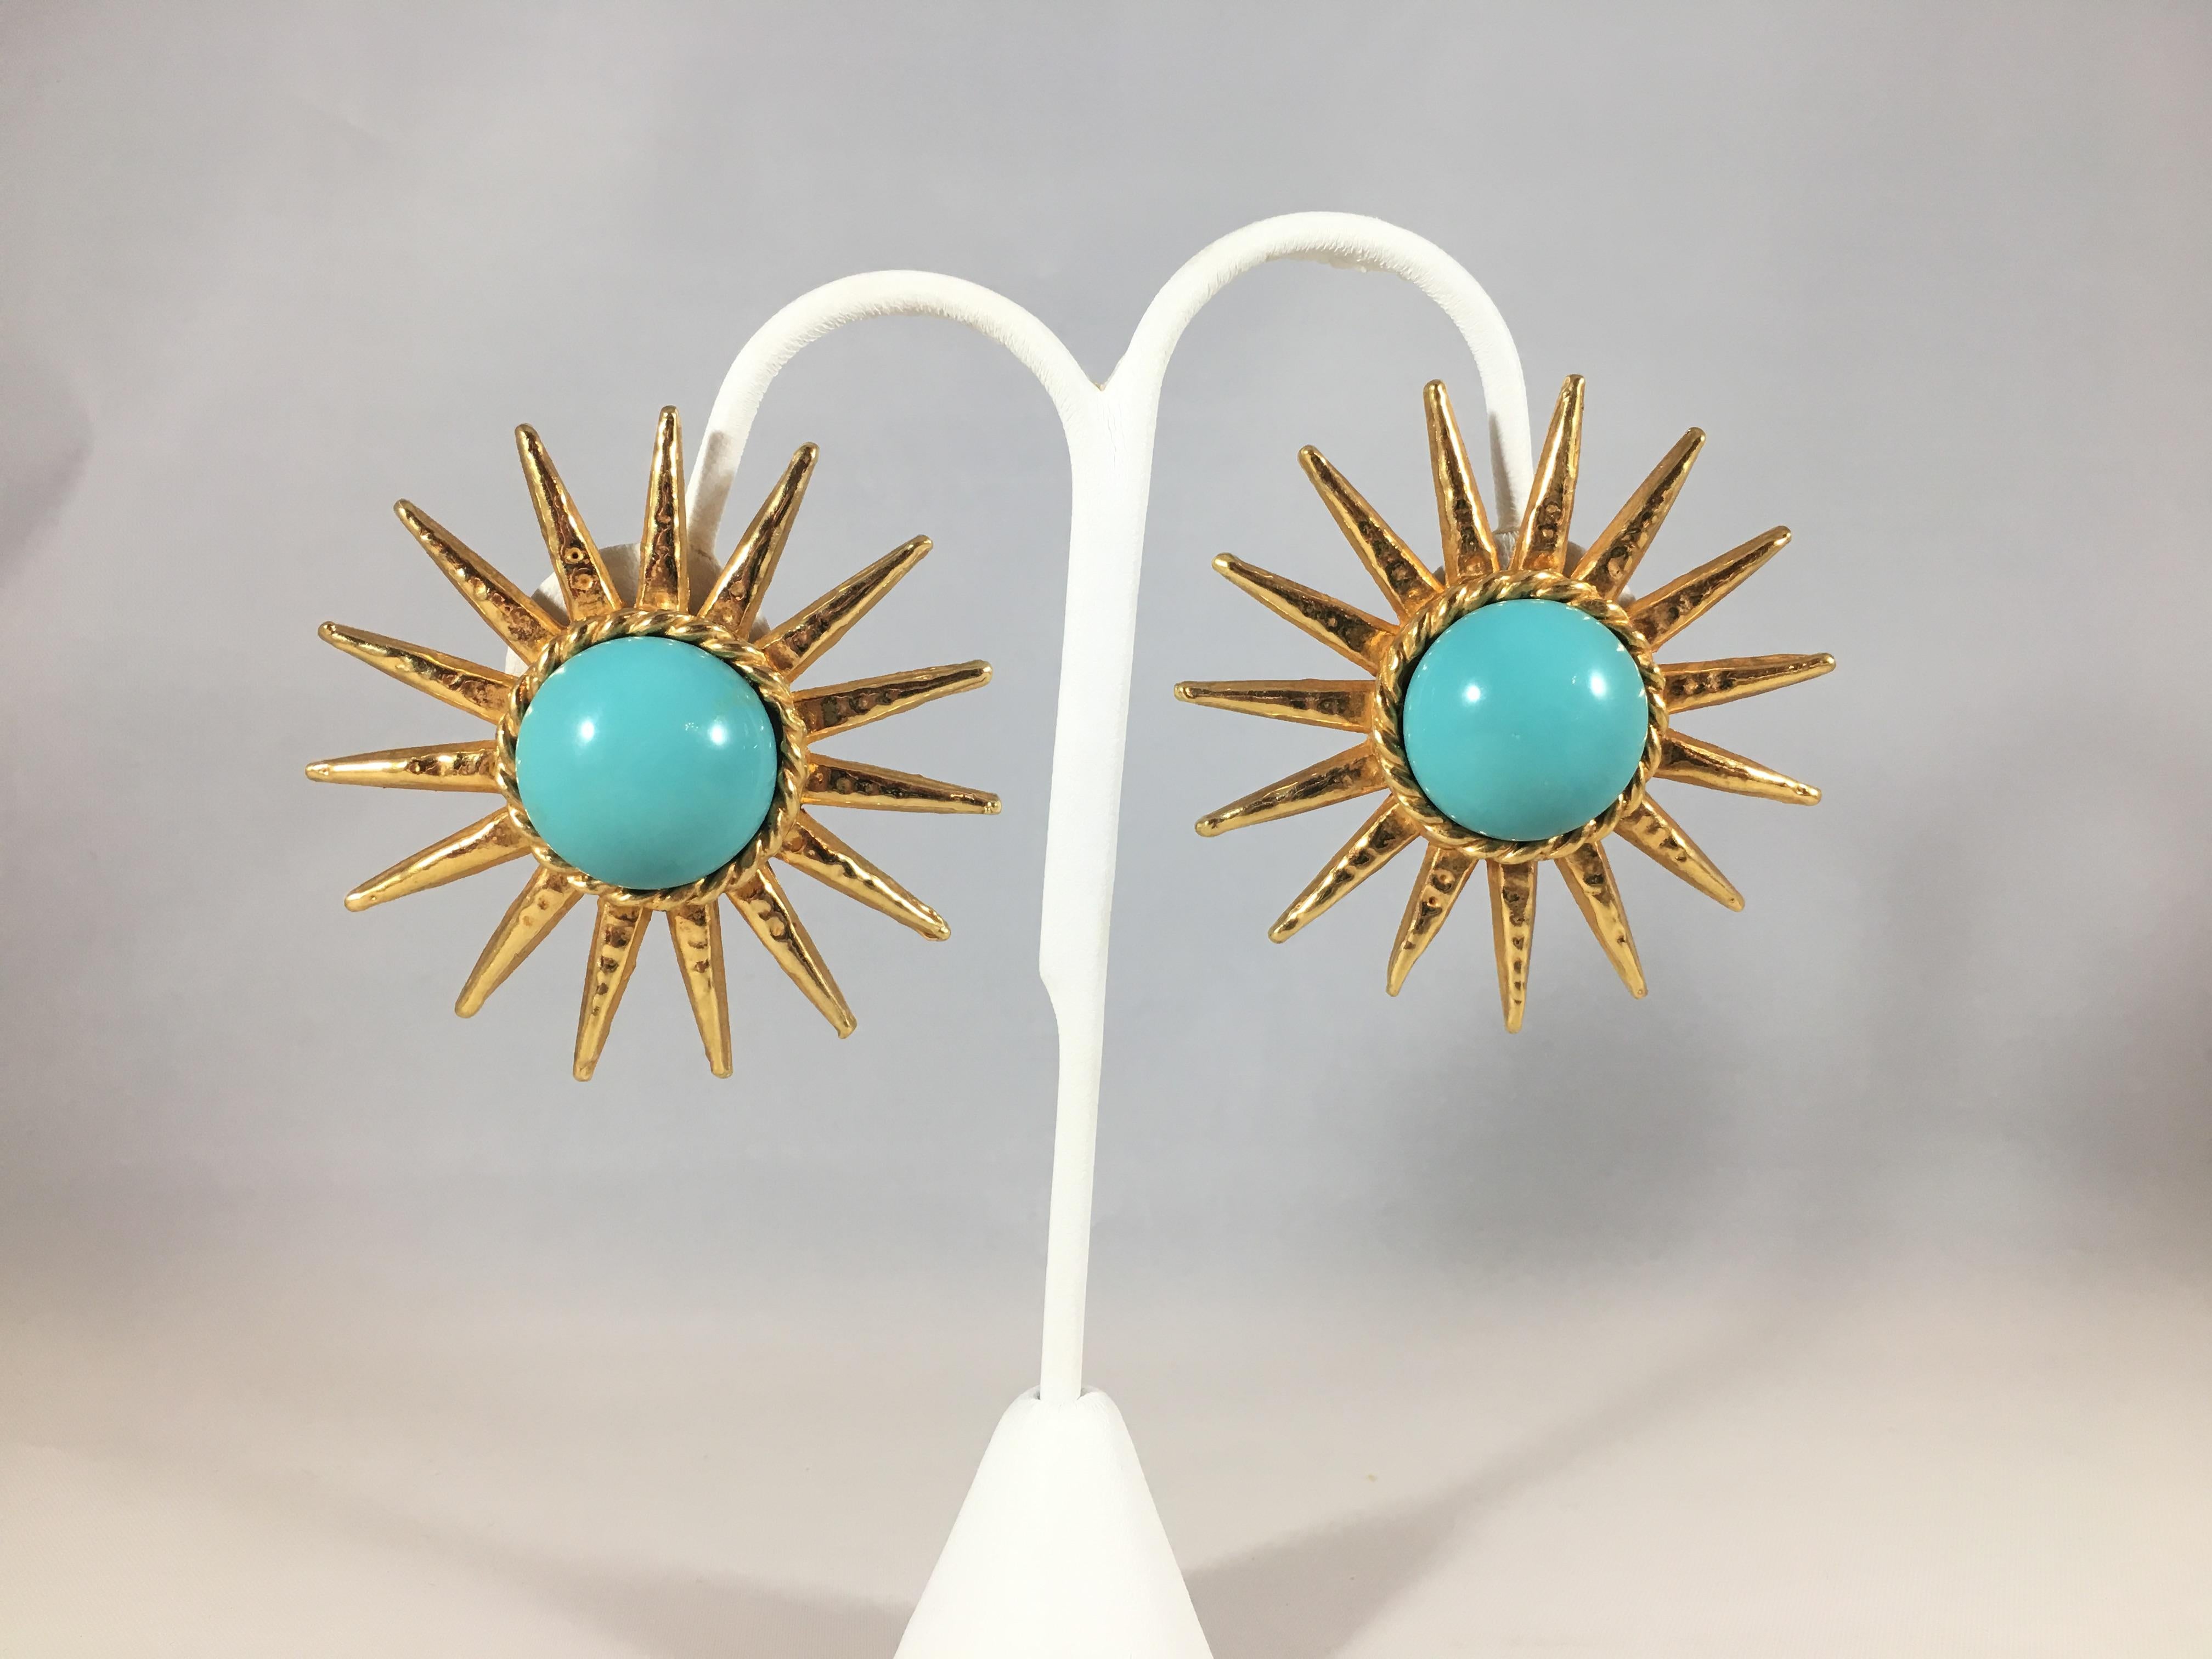 This is a stunning pair of large gold-tone Phillipe Ferrandis clip-on earrings with glass turquoise colored centers. They are in excellent condition and measure 2 3/16 inches in diameter. They are marked 'Phillipe Ferrandis' on the backs of the